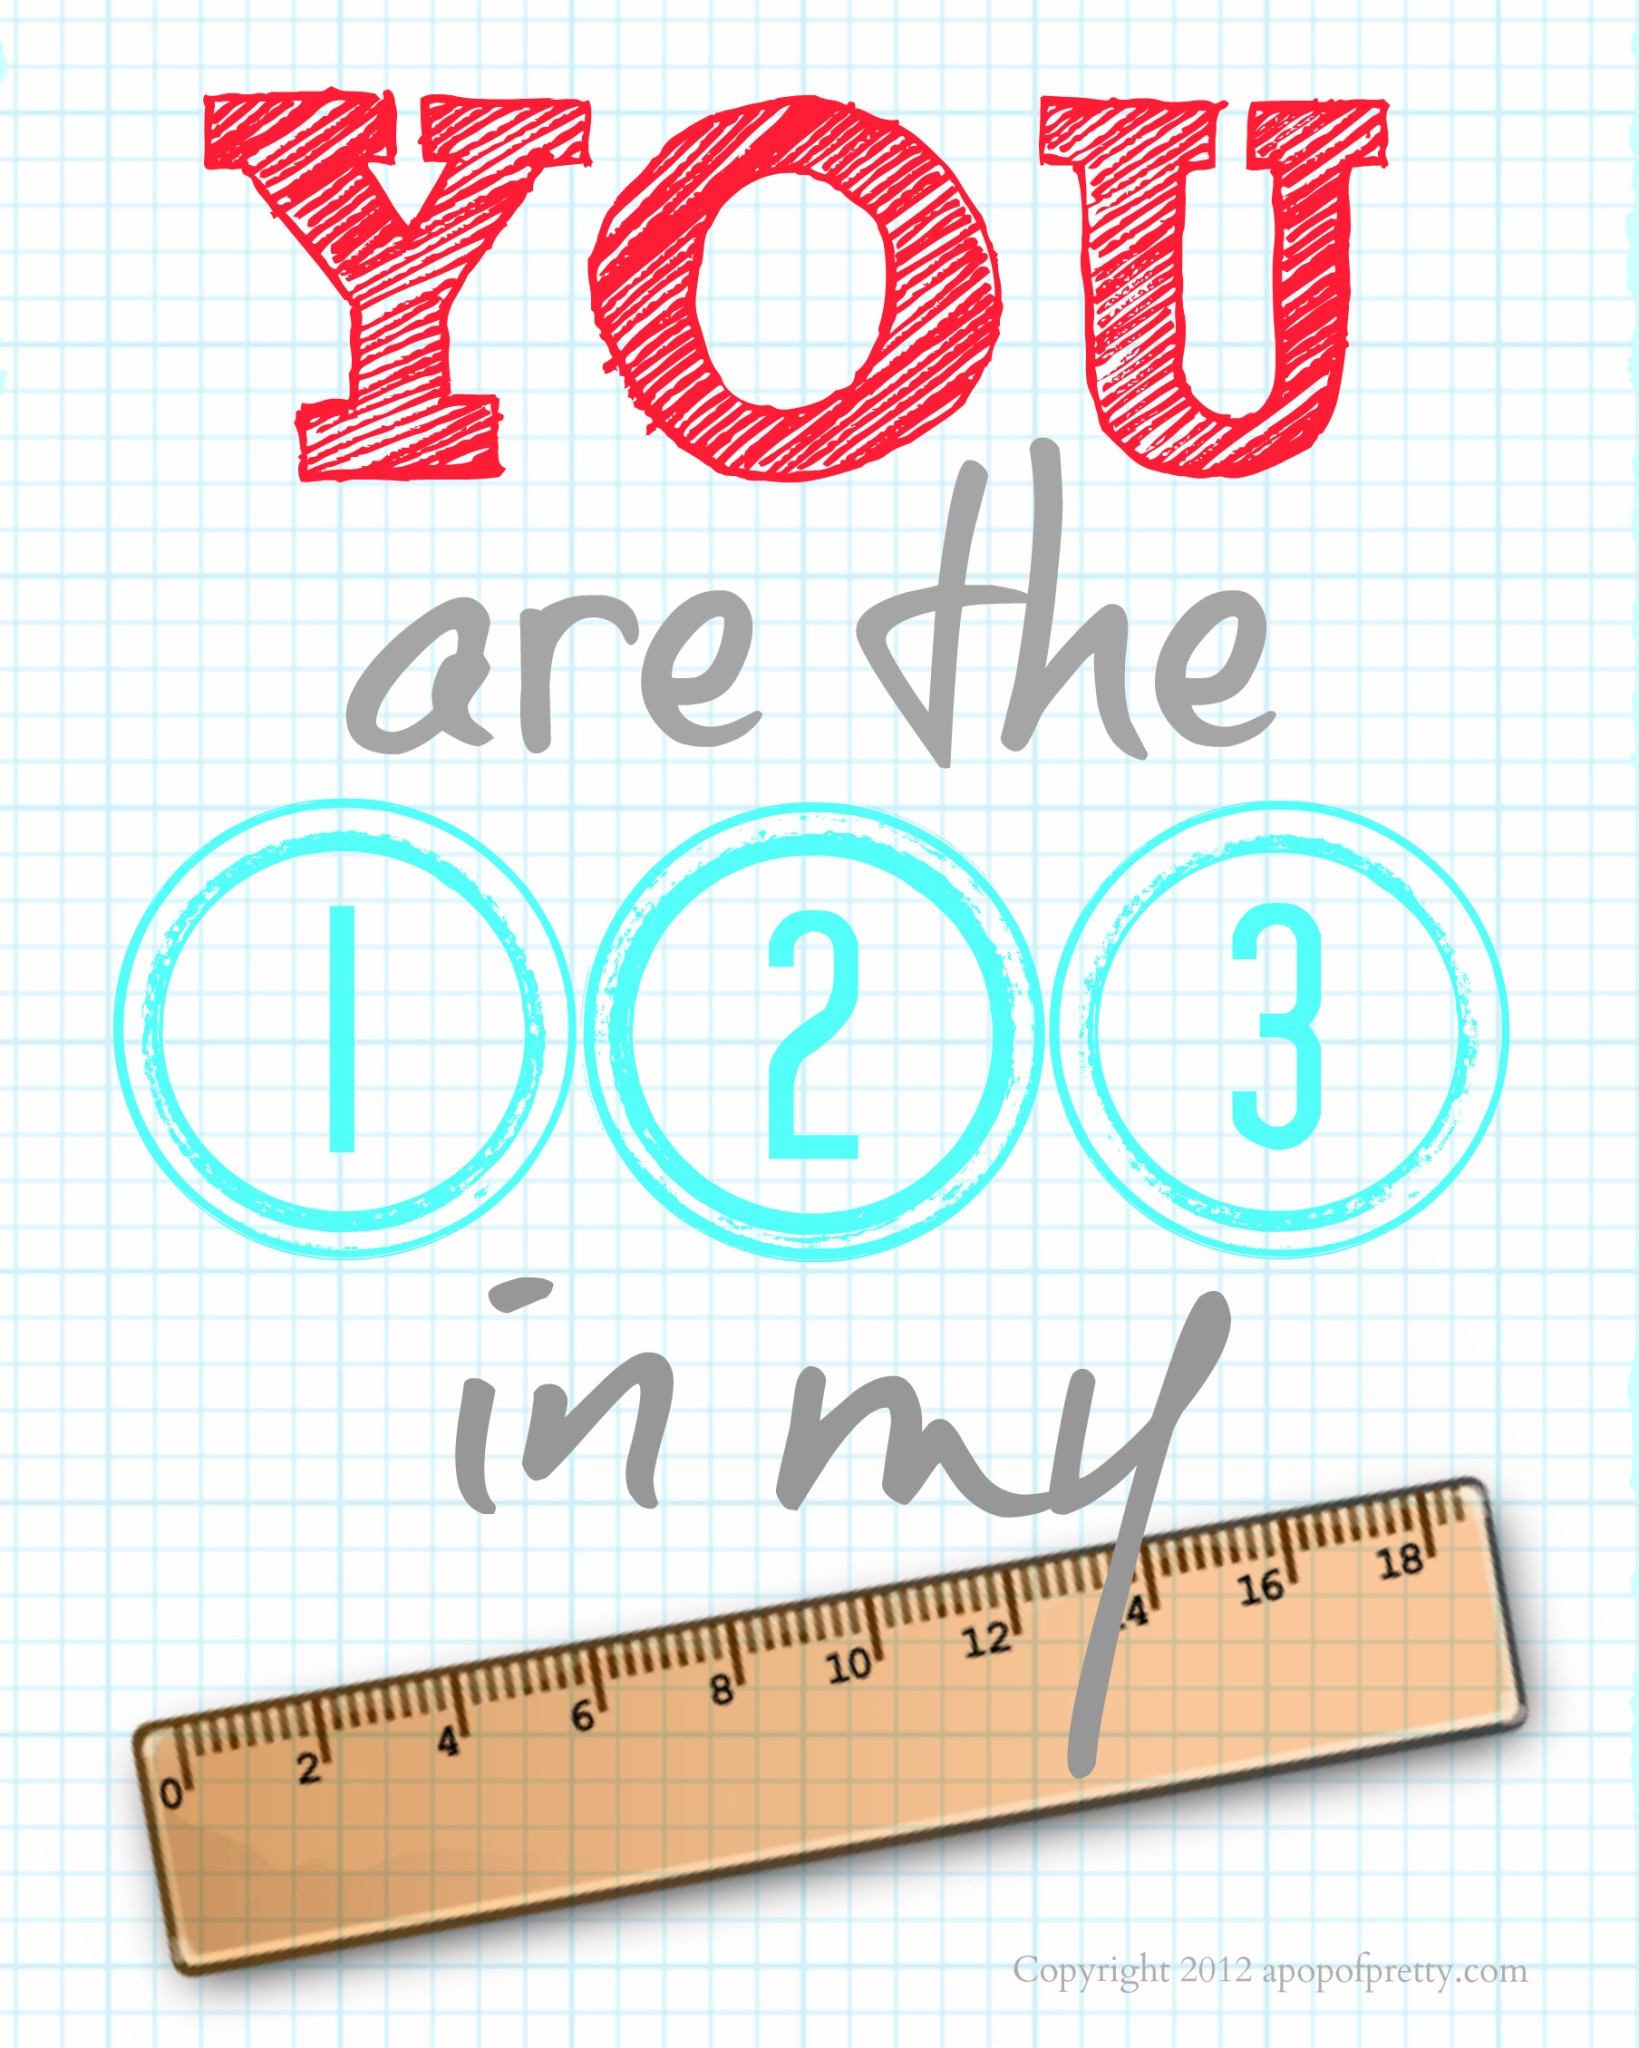 Back-to-School Printable Art #2 (Free): “You are the 1-2-3 in my ruler”